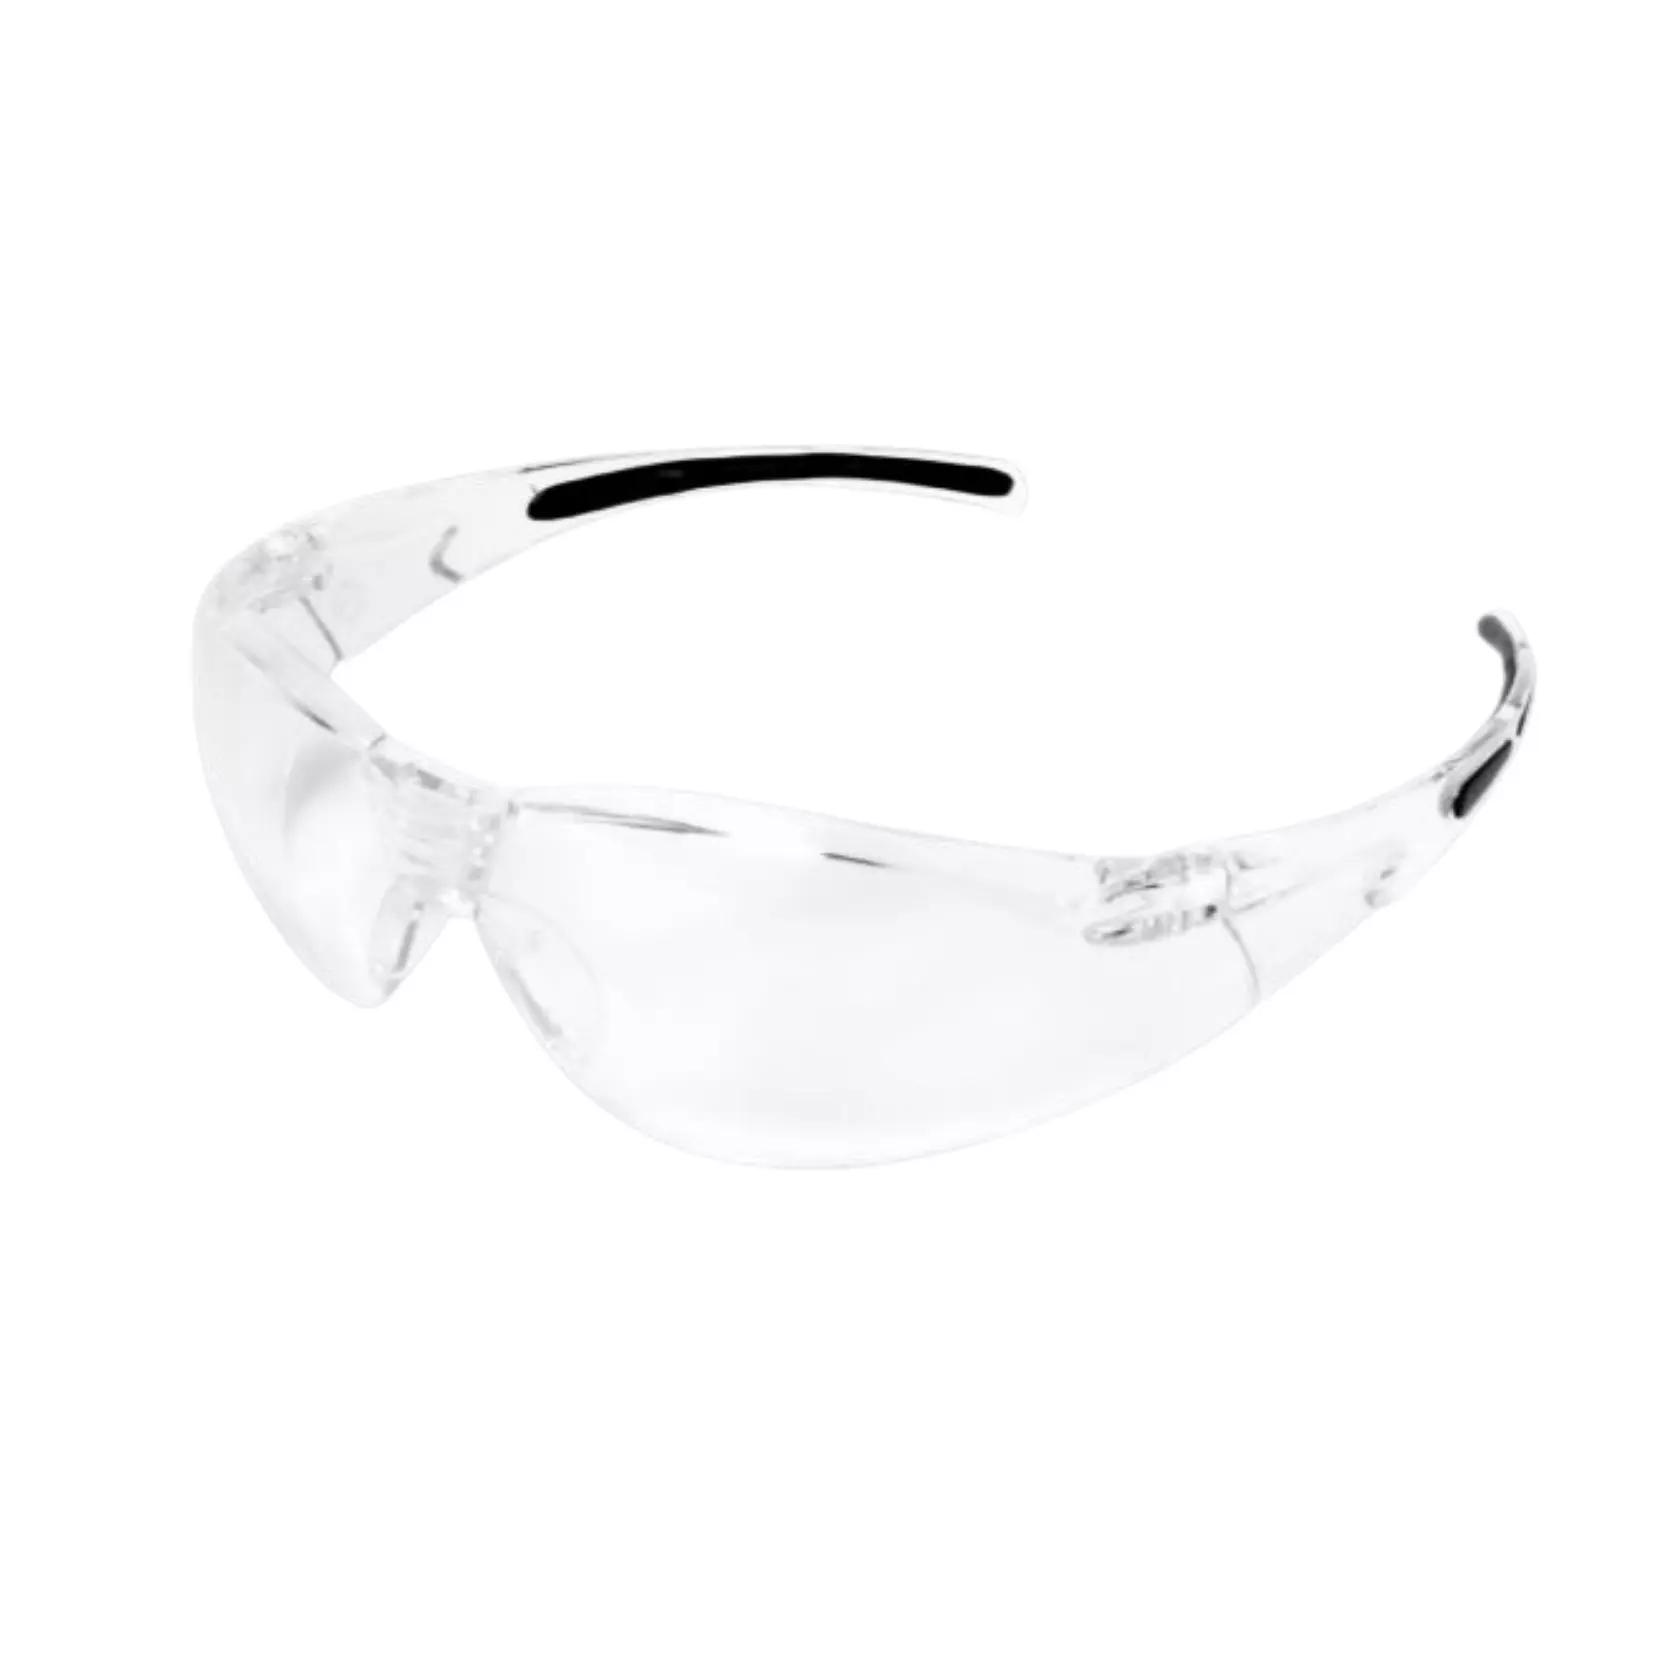 Climax well-fitting goggles